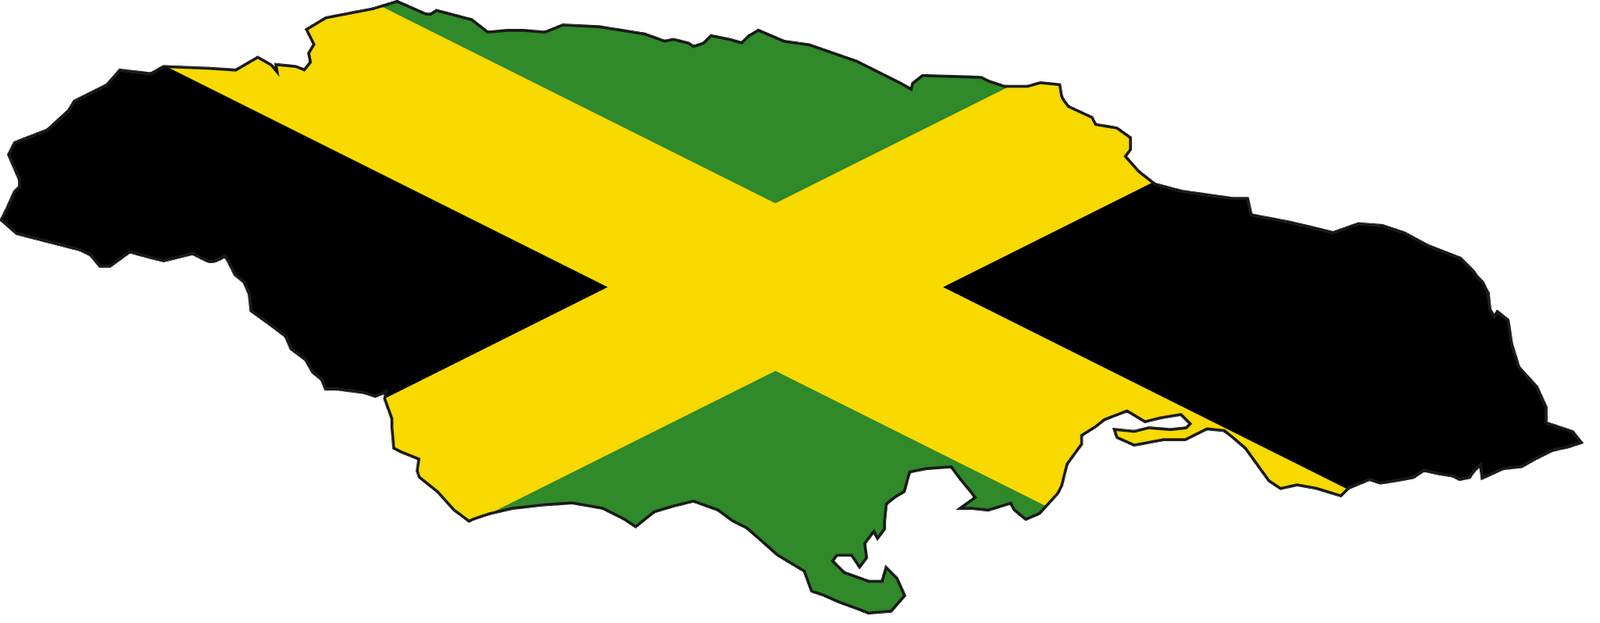 clipart map of jamaica - photo #19